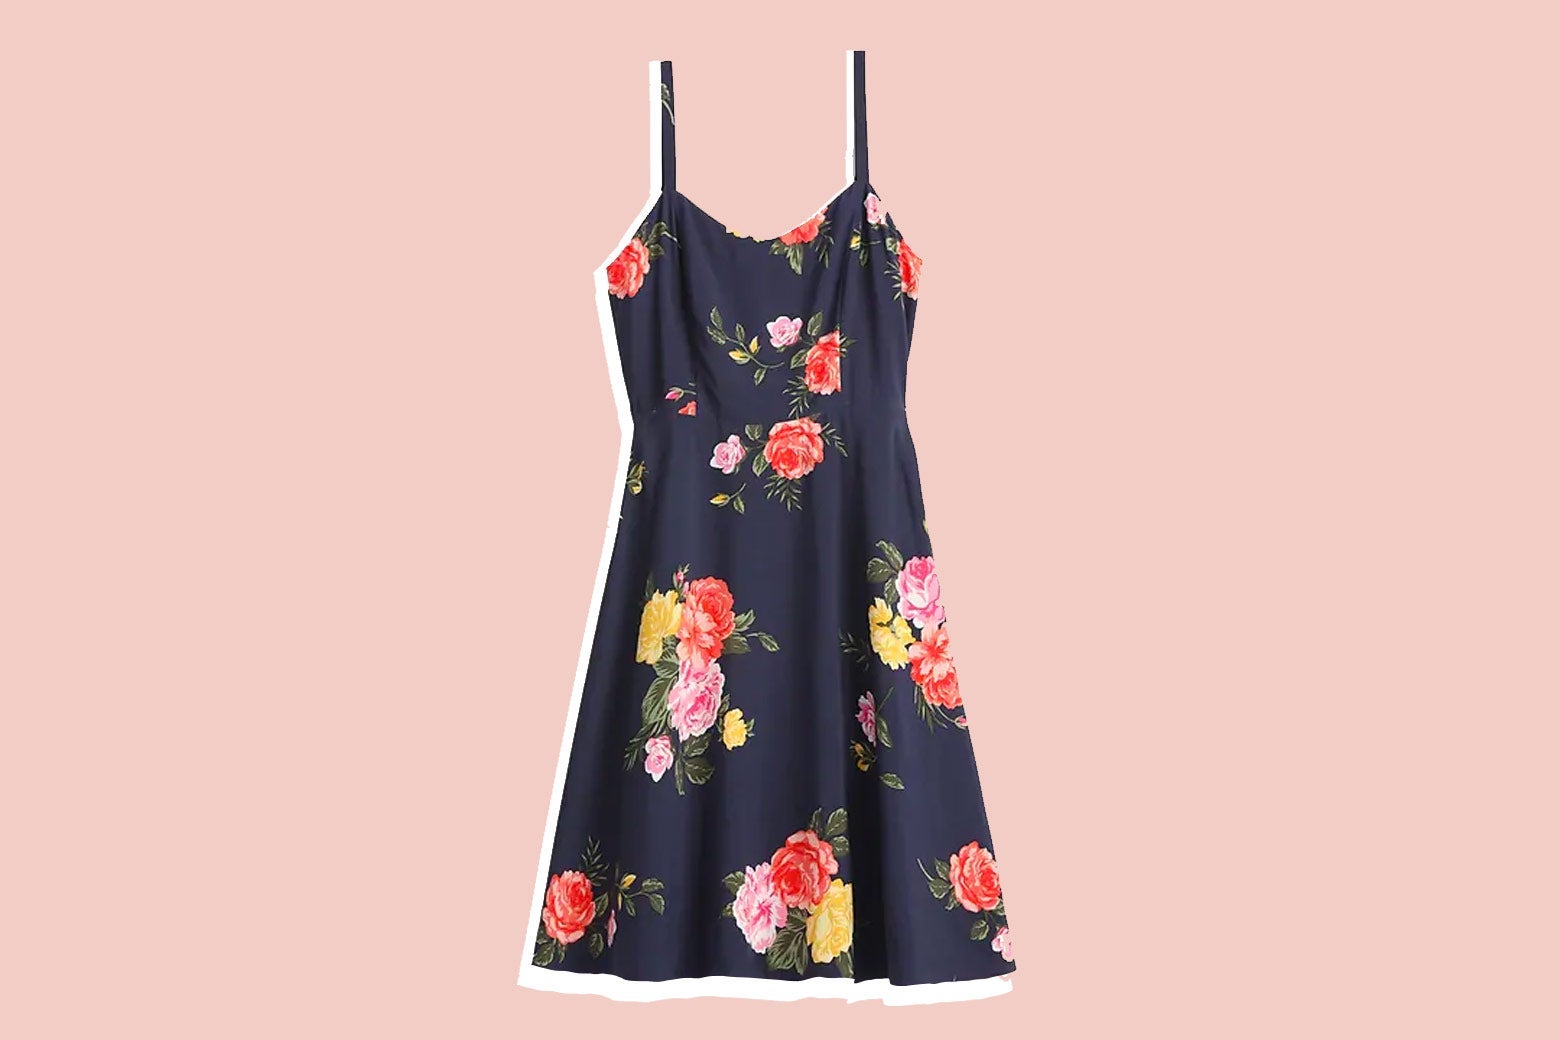 A-line sleeveless dress with floral print